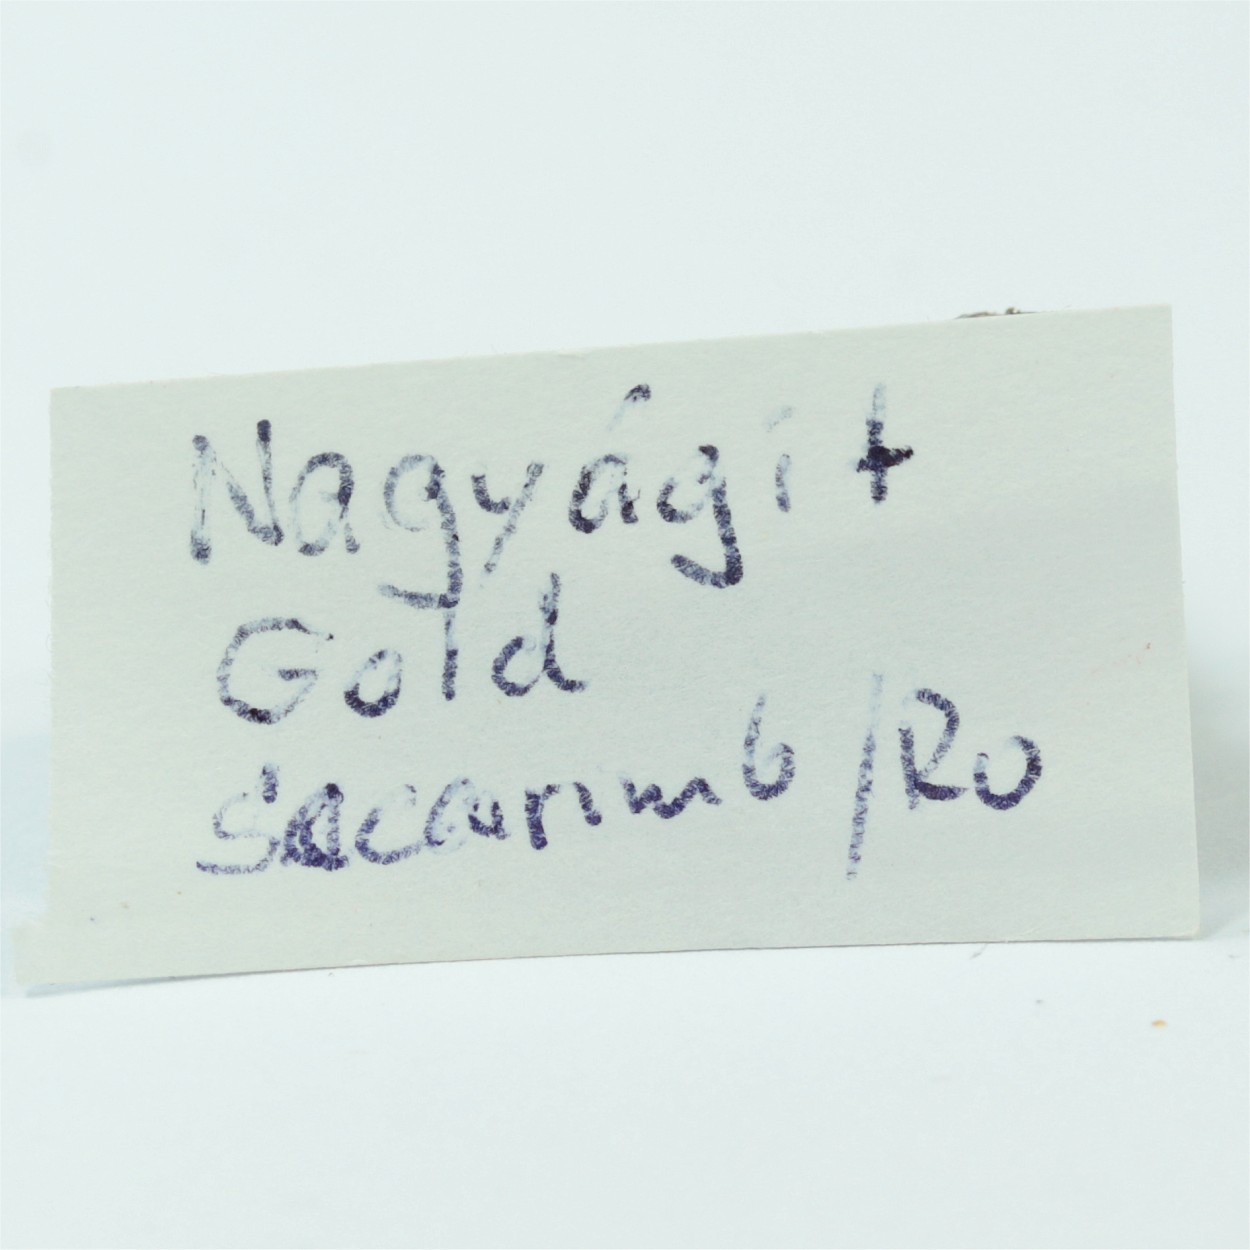 Nagyágite With Gold